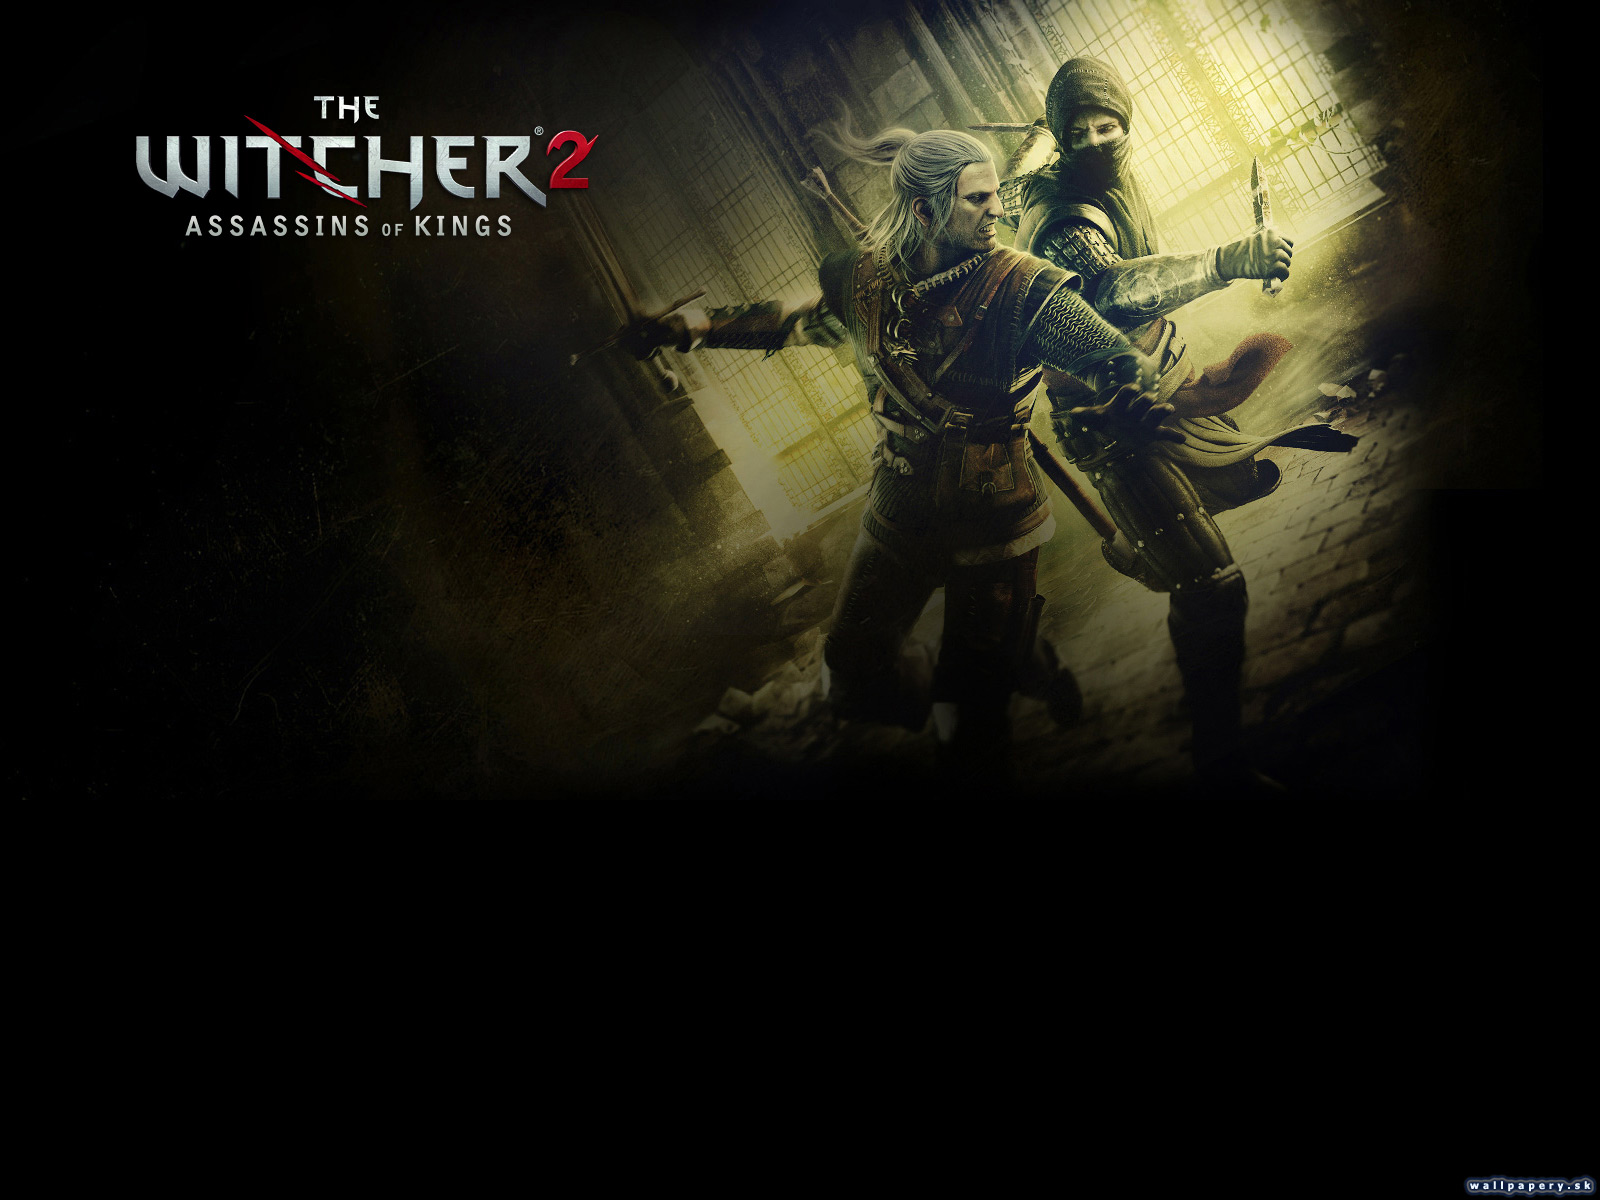 The Witcher 2: Assassins of Kings - wallpaper 2